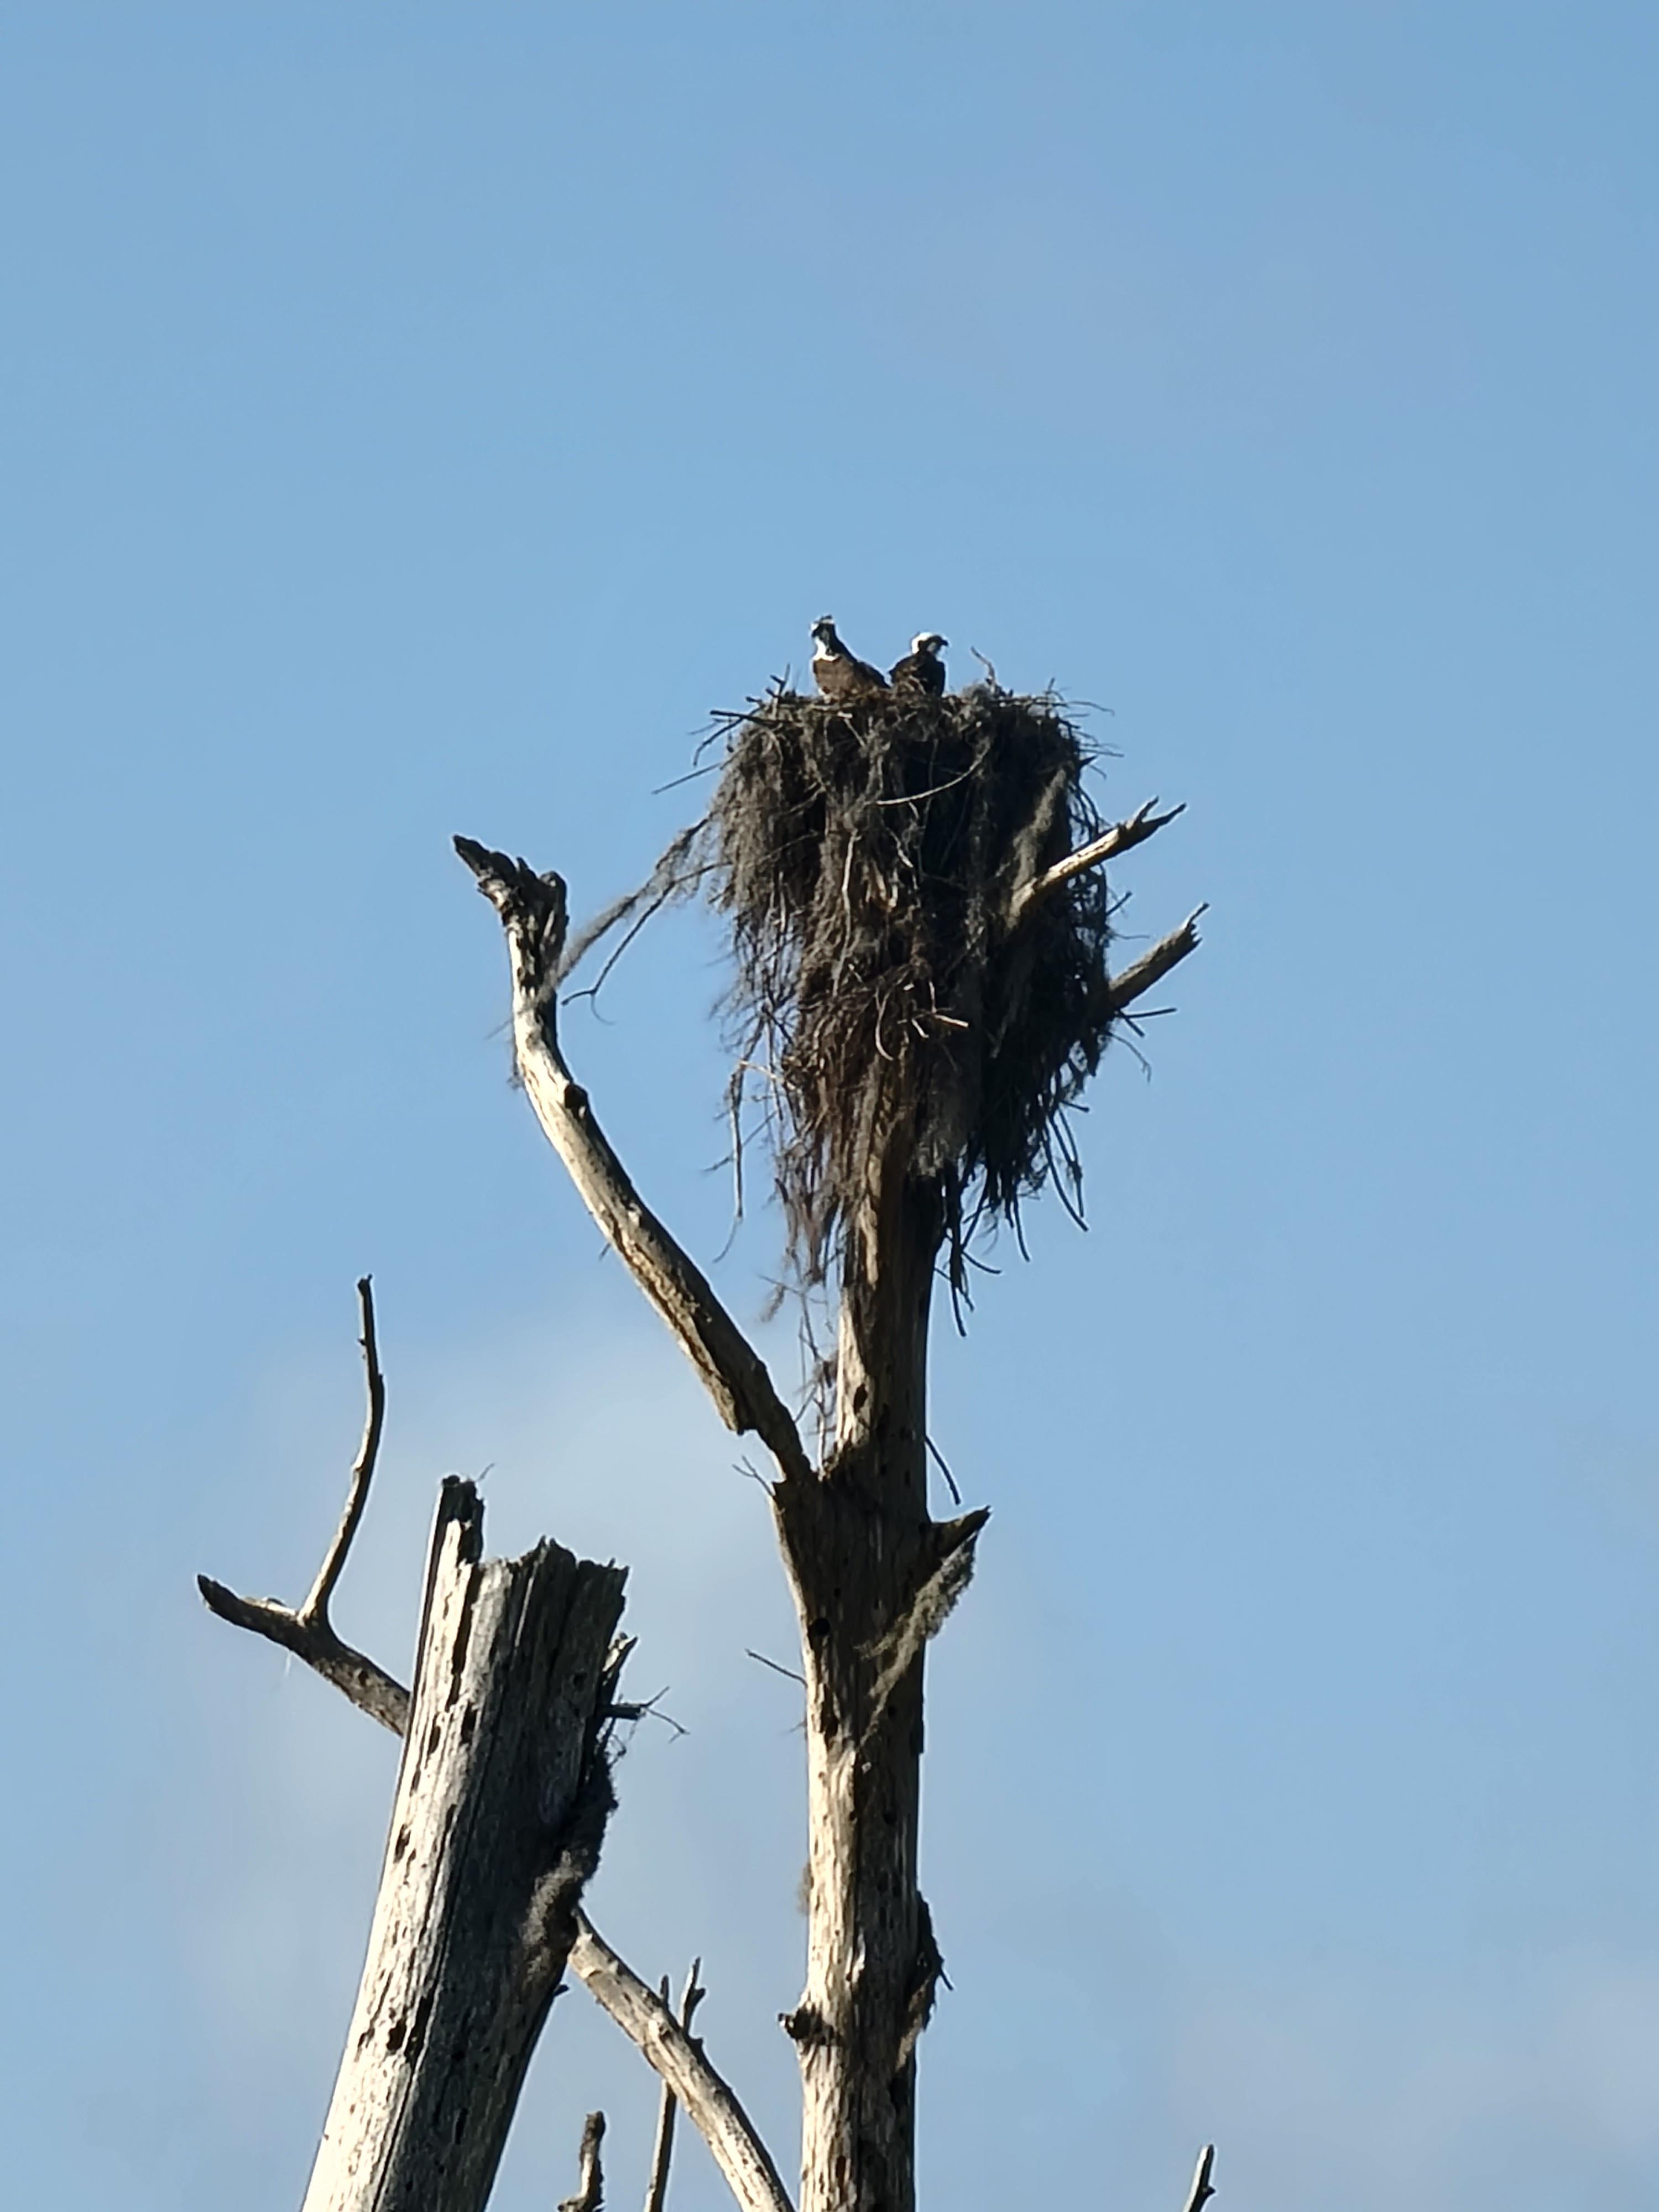 Osprey survey the marsh from their secure high perch.